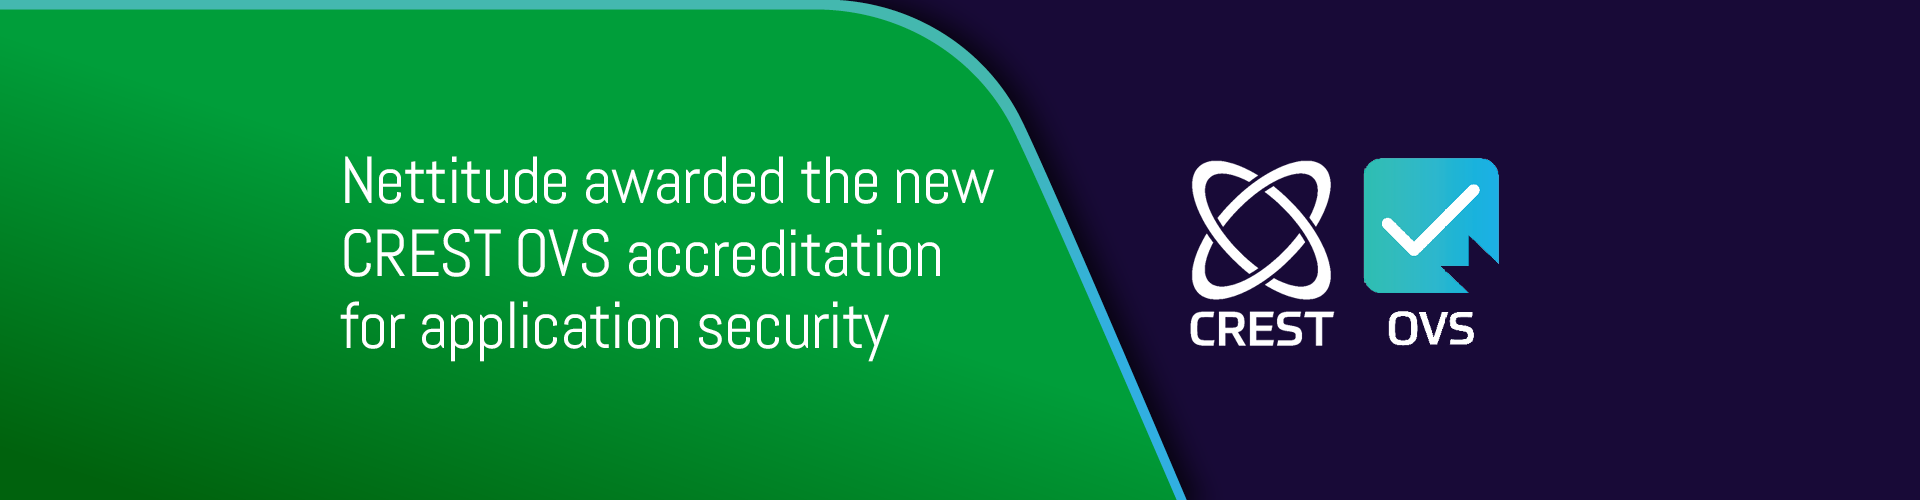 LRQA Nettitude among the first to be awarded CREST accreditation for application security